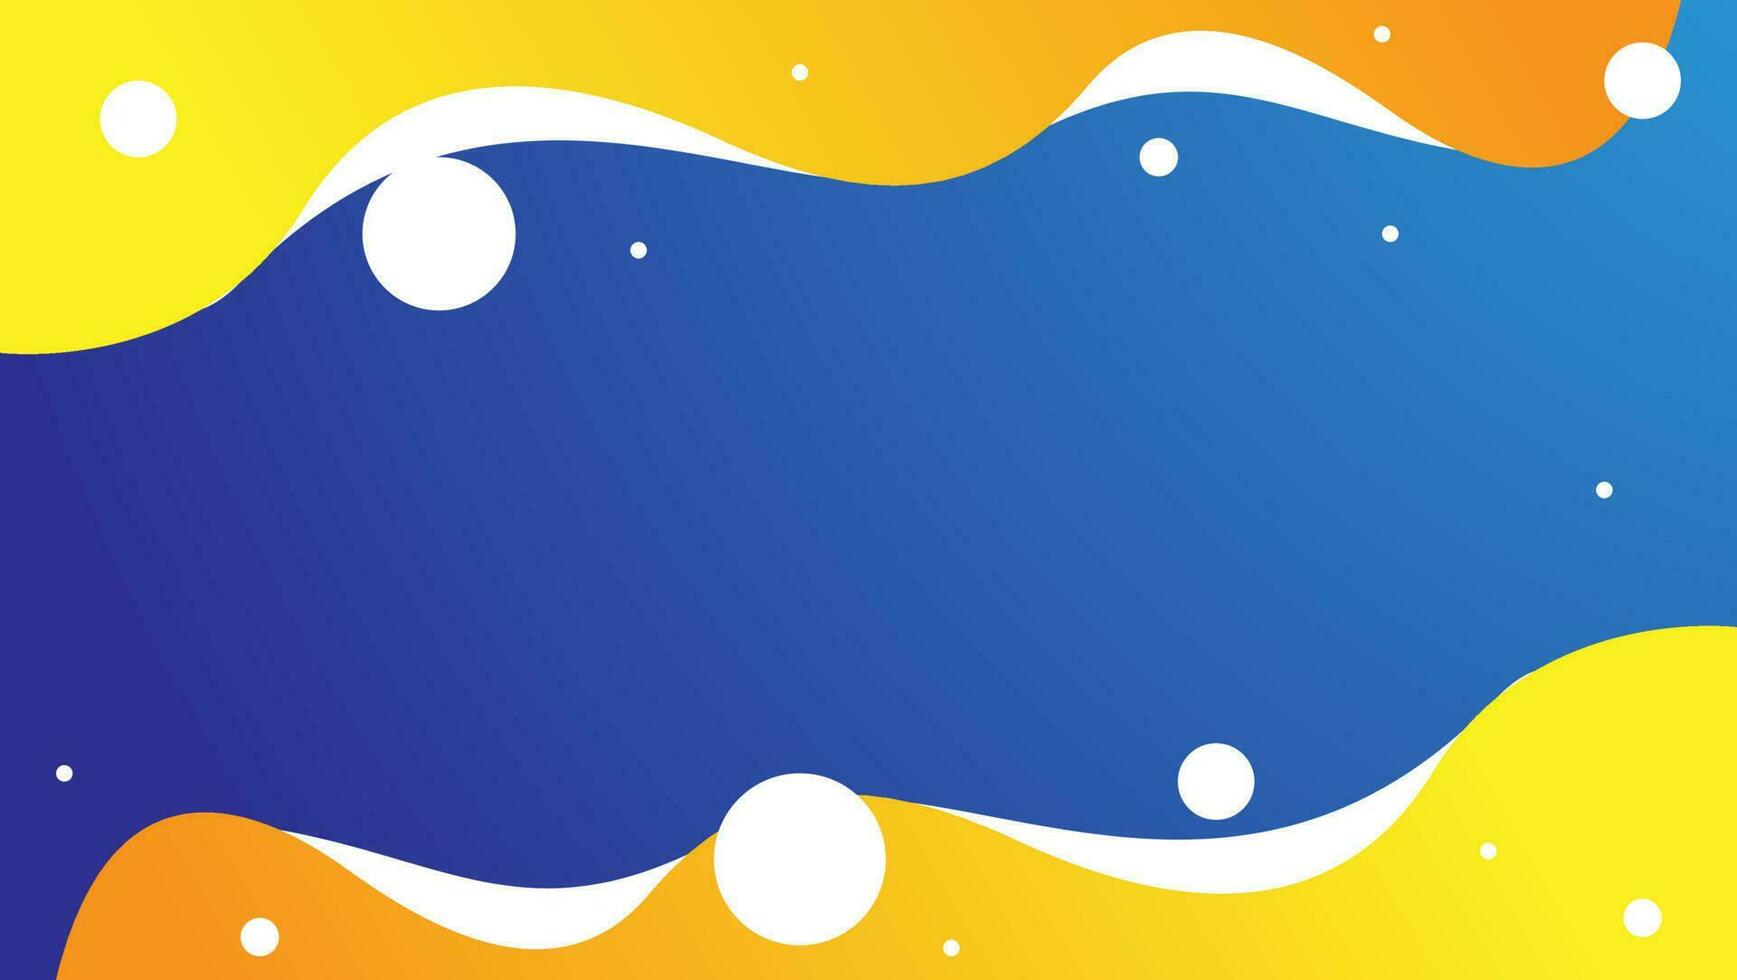 abstract wave background with blue and yellow color. vector illustration